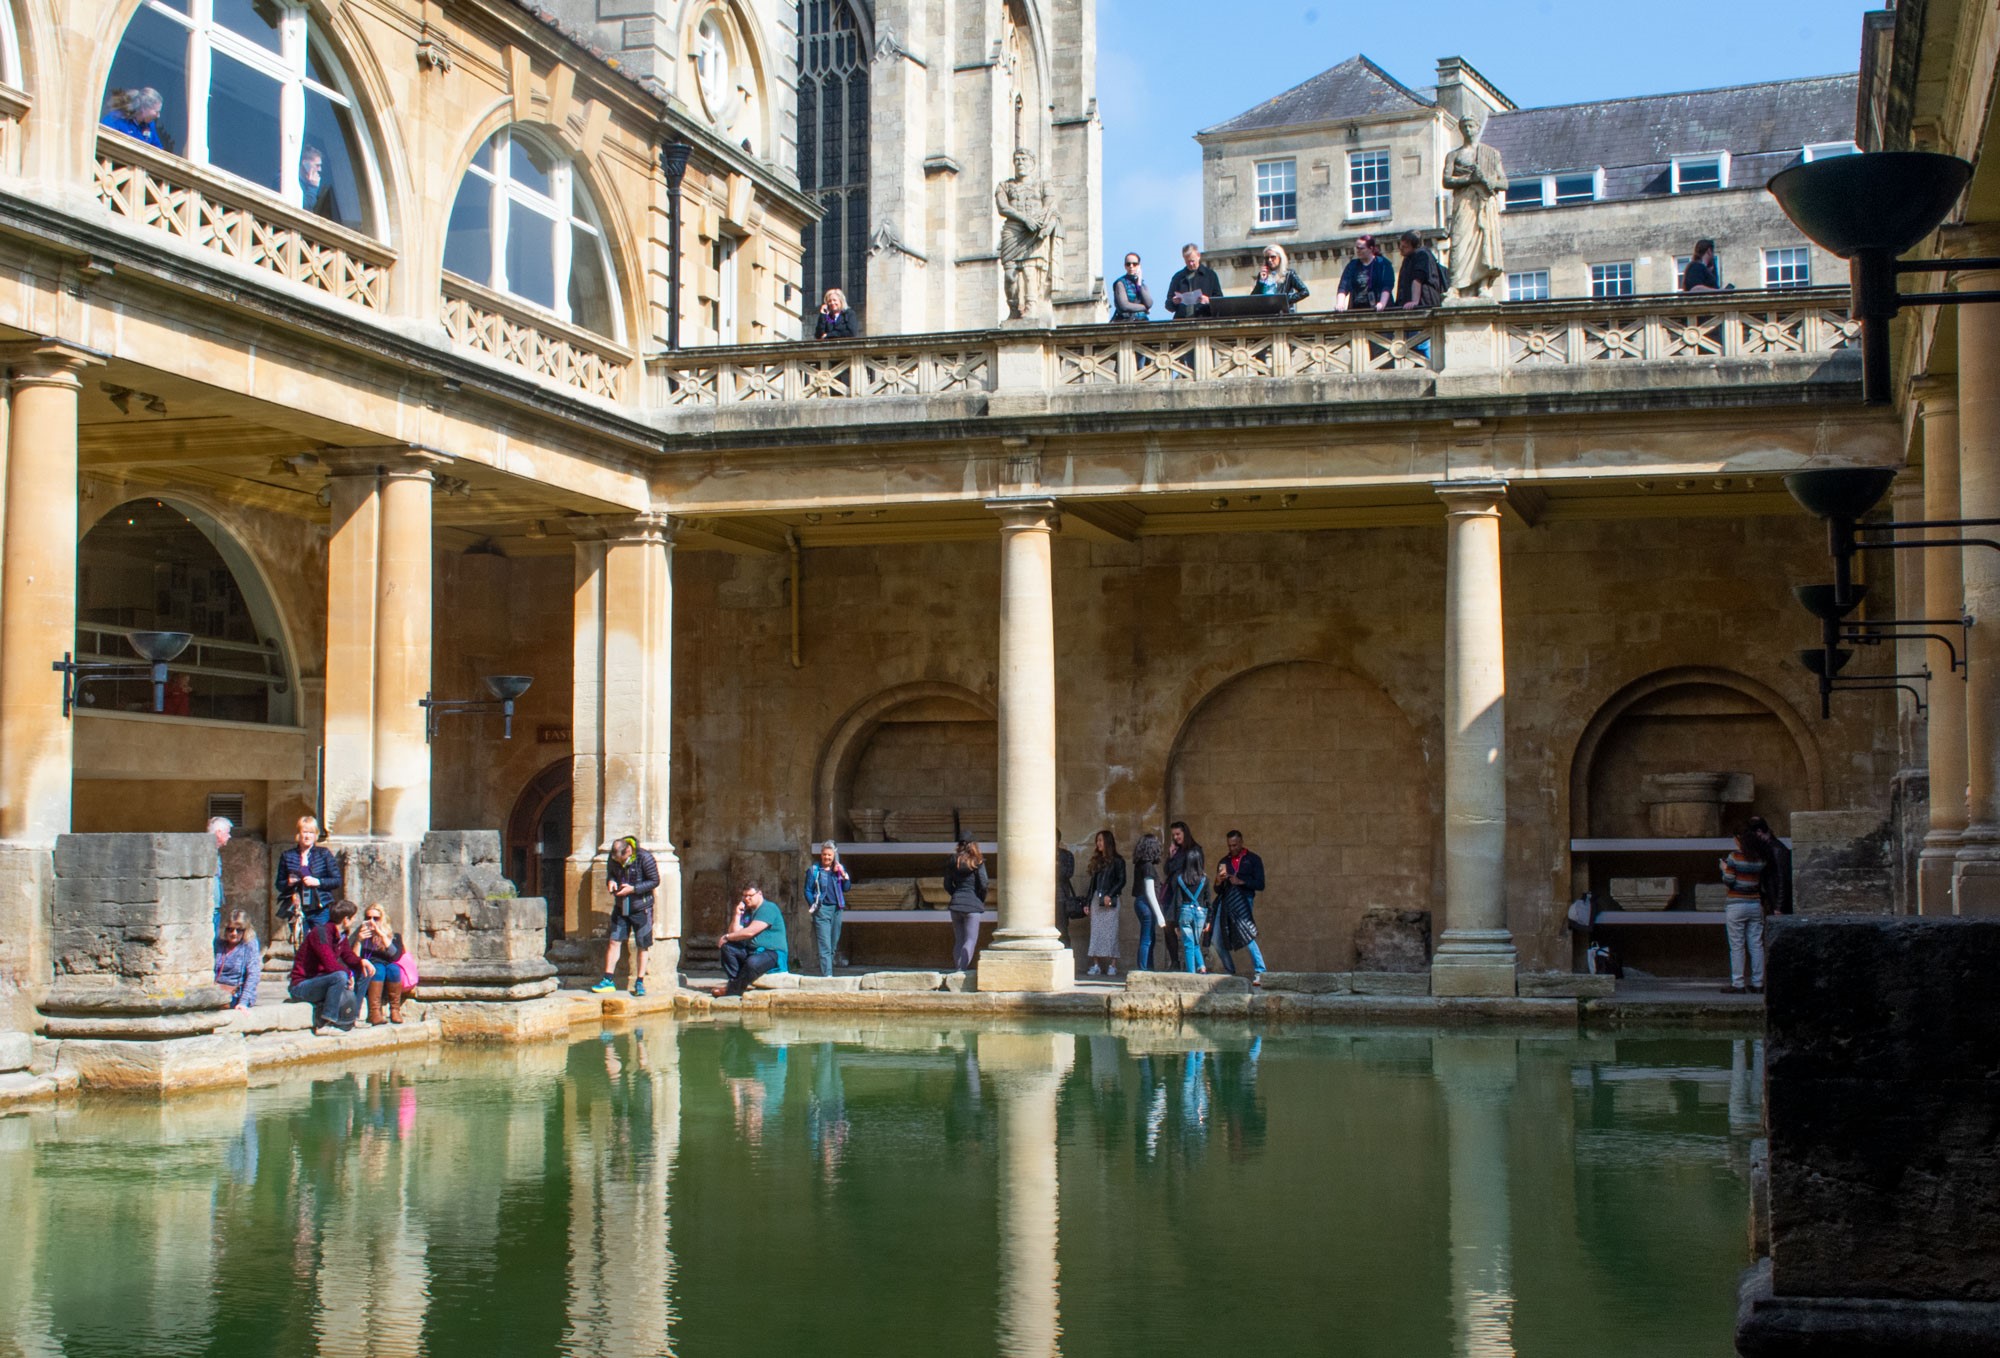 View of the Roman Baths in Bath, Italy.